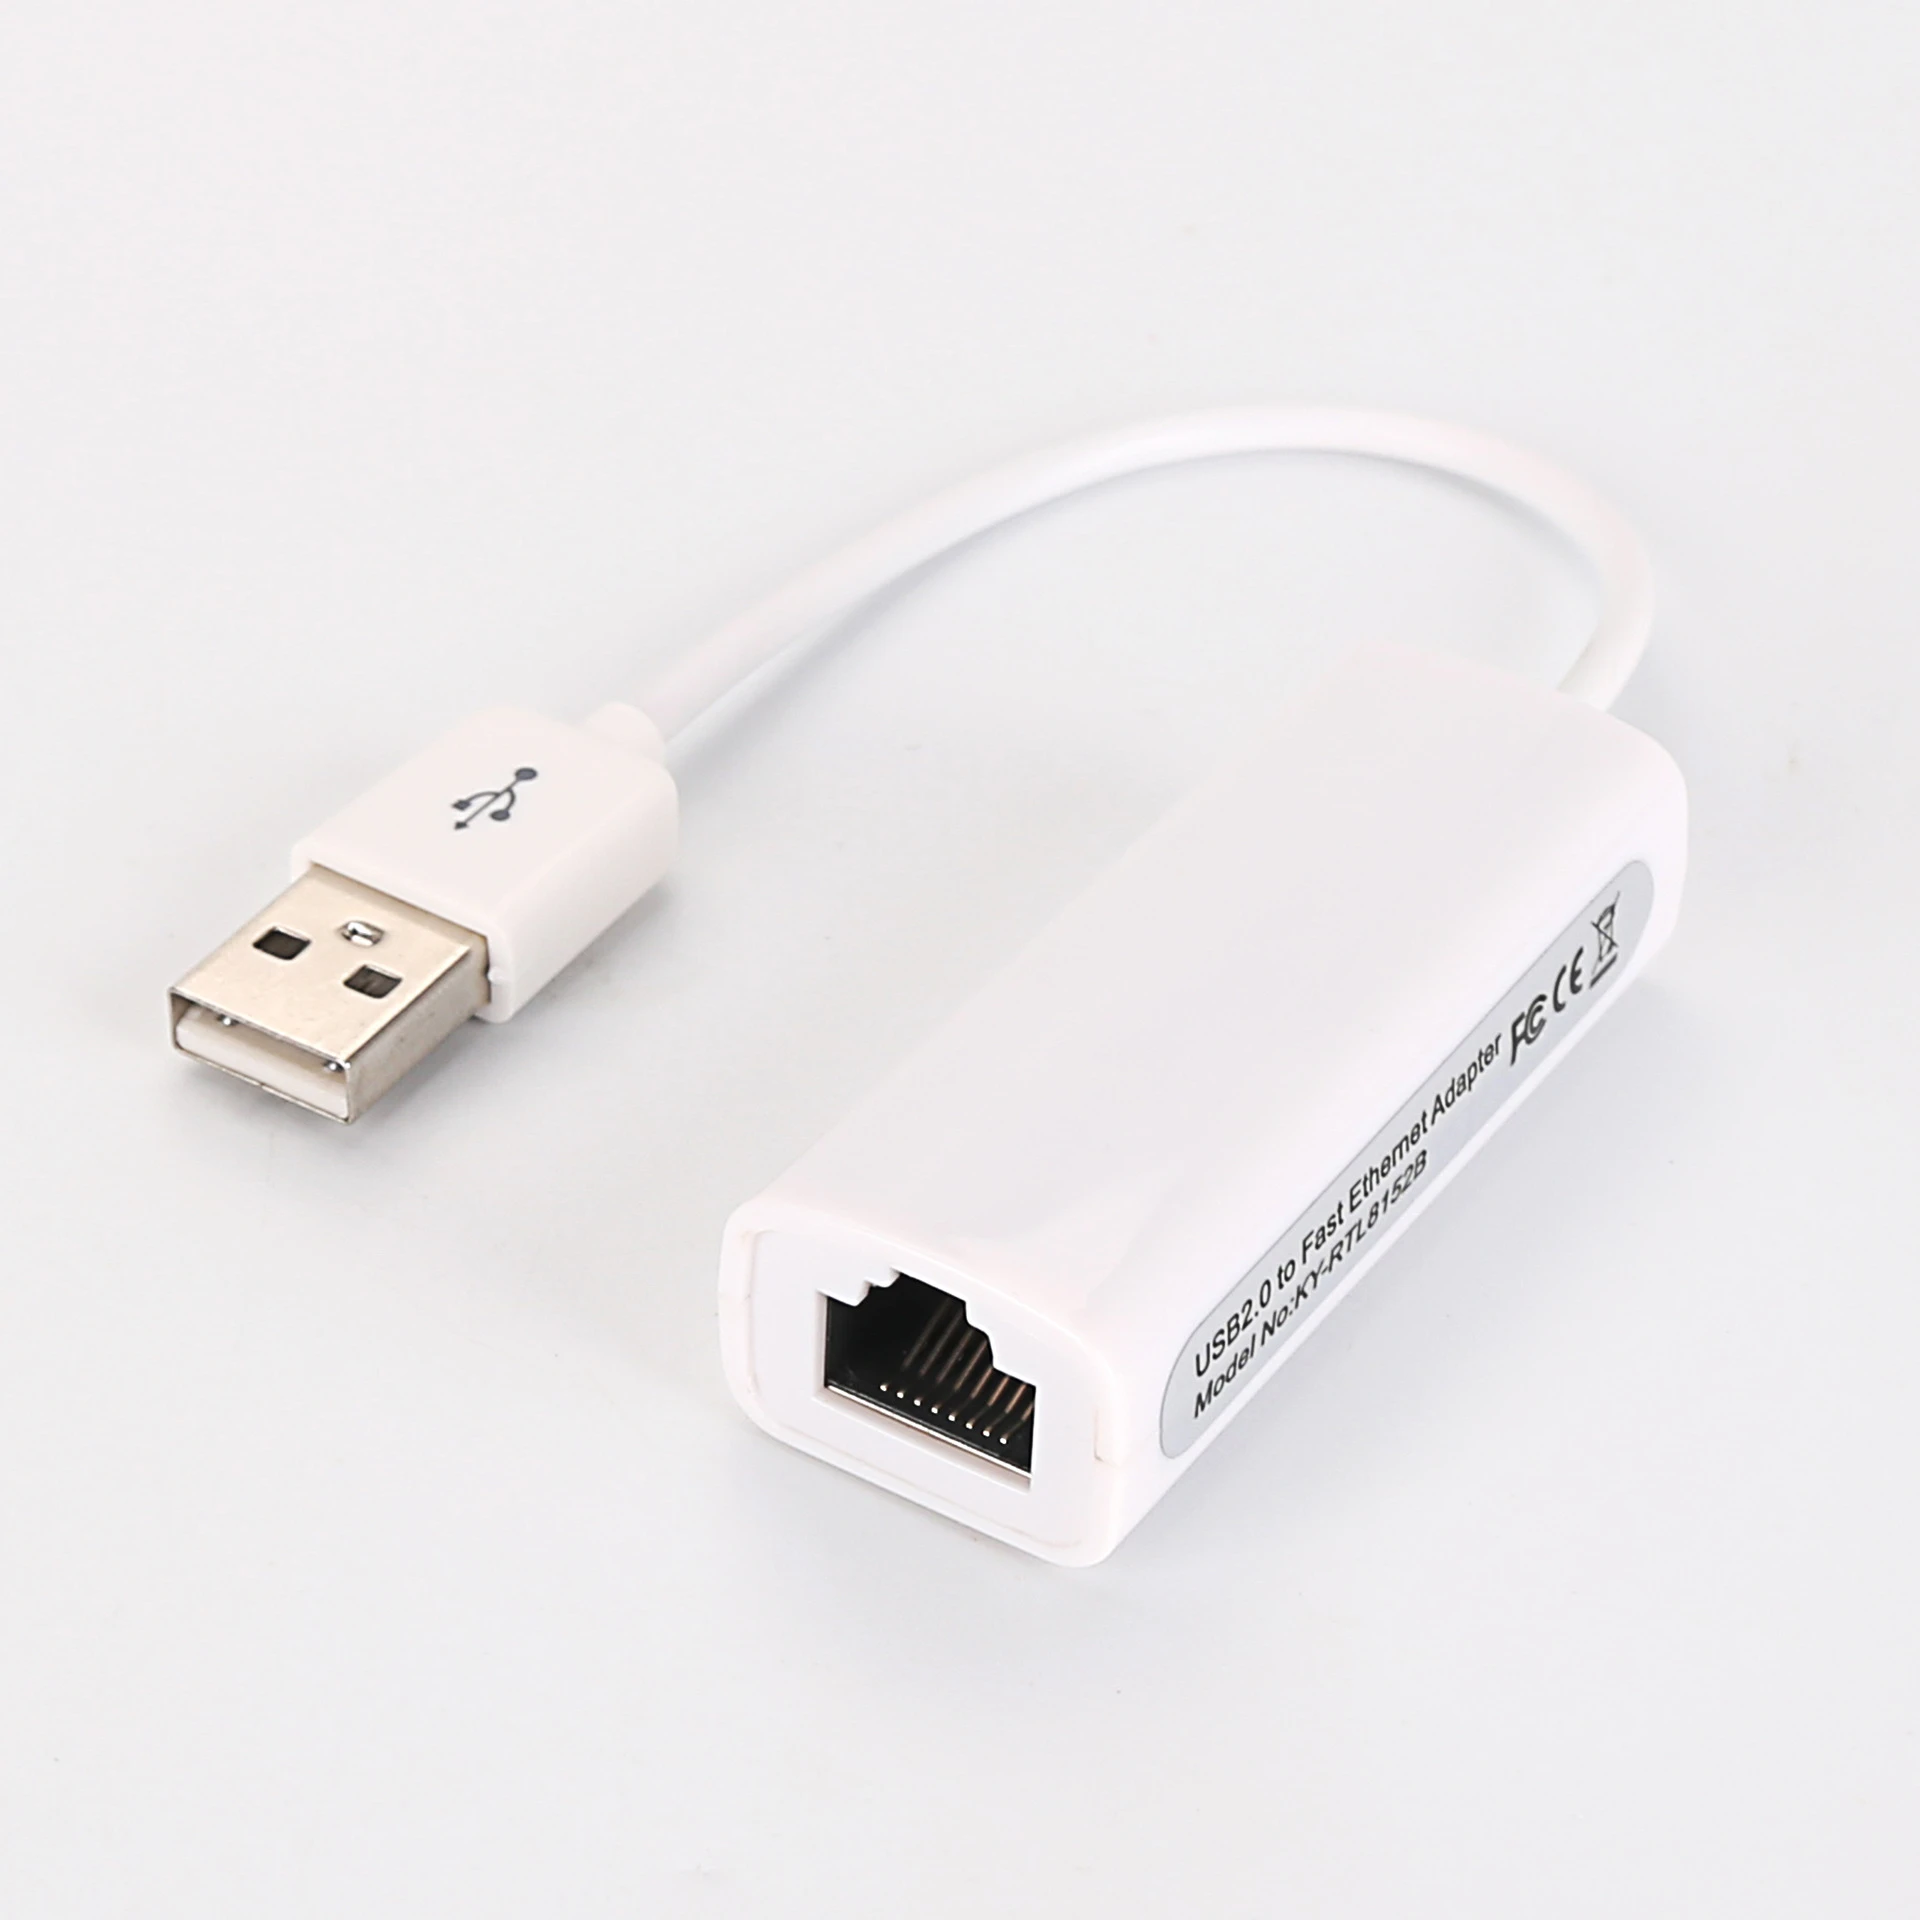 USB 2.0 to Ethernet RJ45 Female Network LAN 10/100 Mbps Full Duplex Cable / Half Adapter Card 8152B Chip